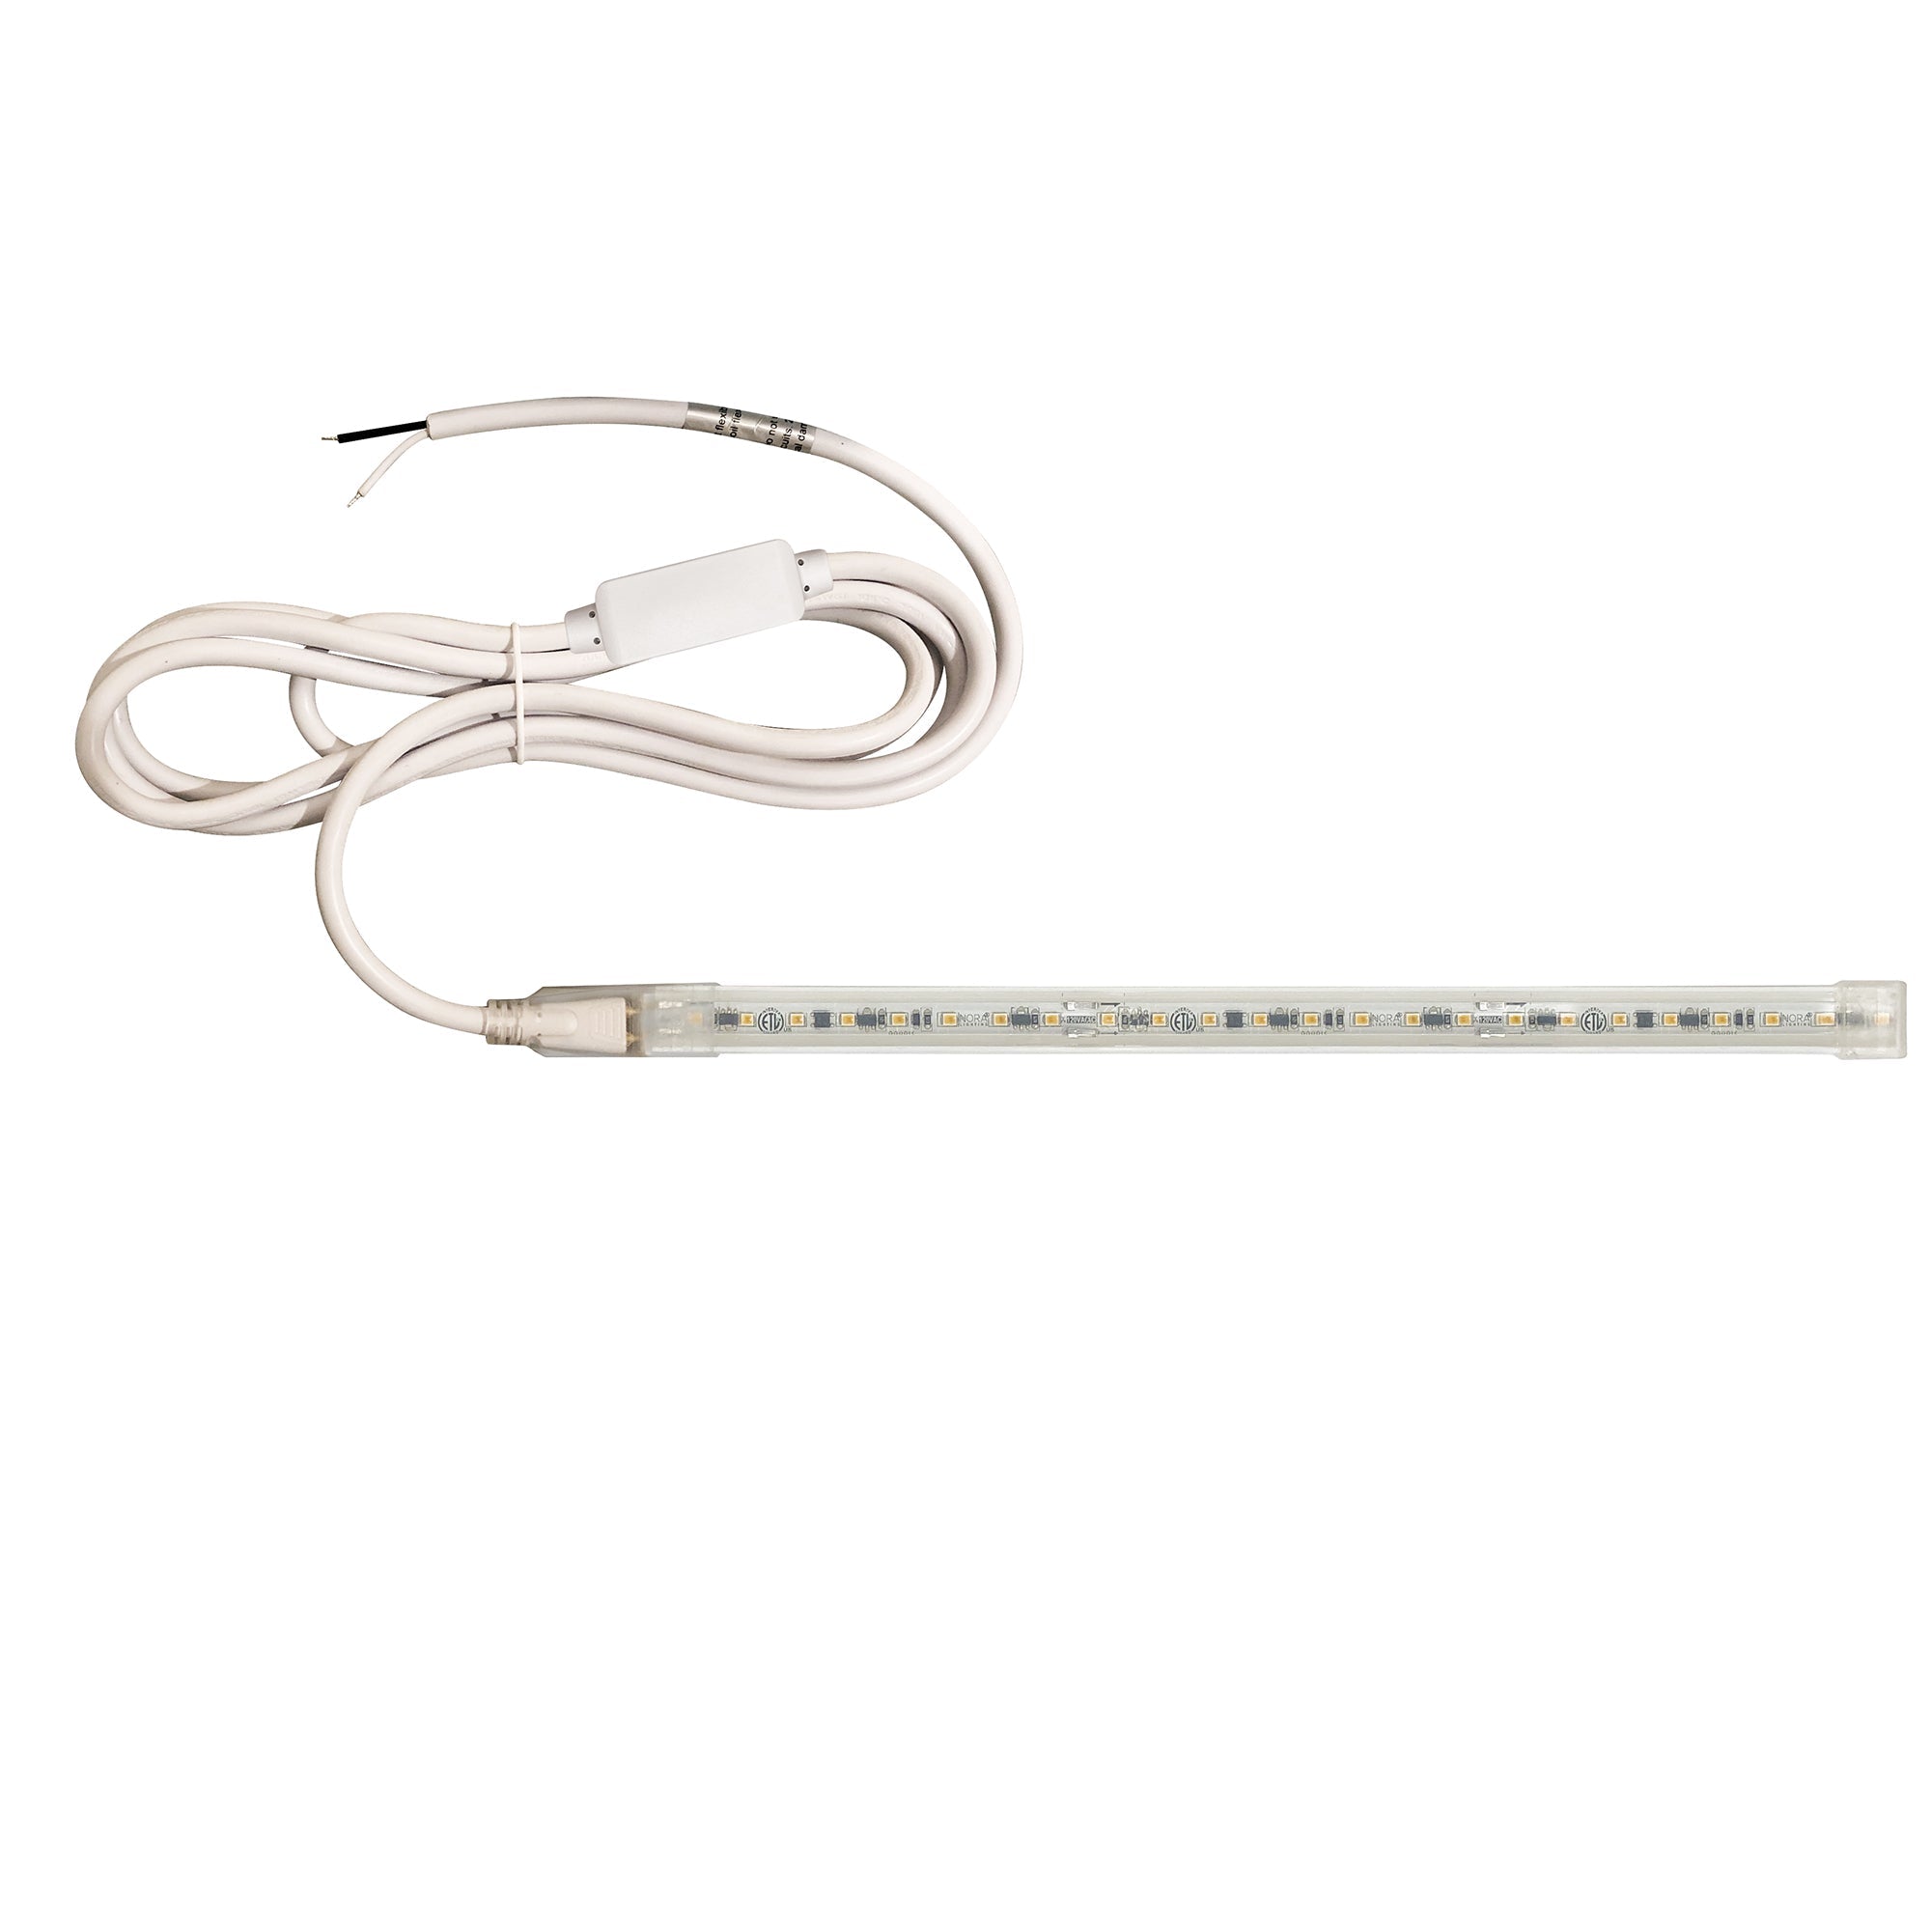 Nora Lighting NUTP13-W10-8-12-930/HWSP - Accent / Undercabinet - Custom Cut 10-ft, 8-in 120V Continuous LED Tape Light, 330lm / 3.6W per foot, 3000K, w/ Mounting Clips and 8' Hardwired Power Cord w/ Surge Protector